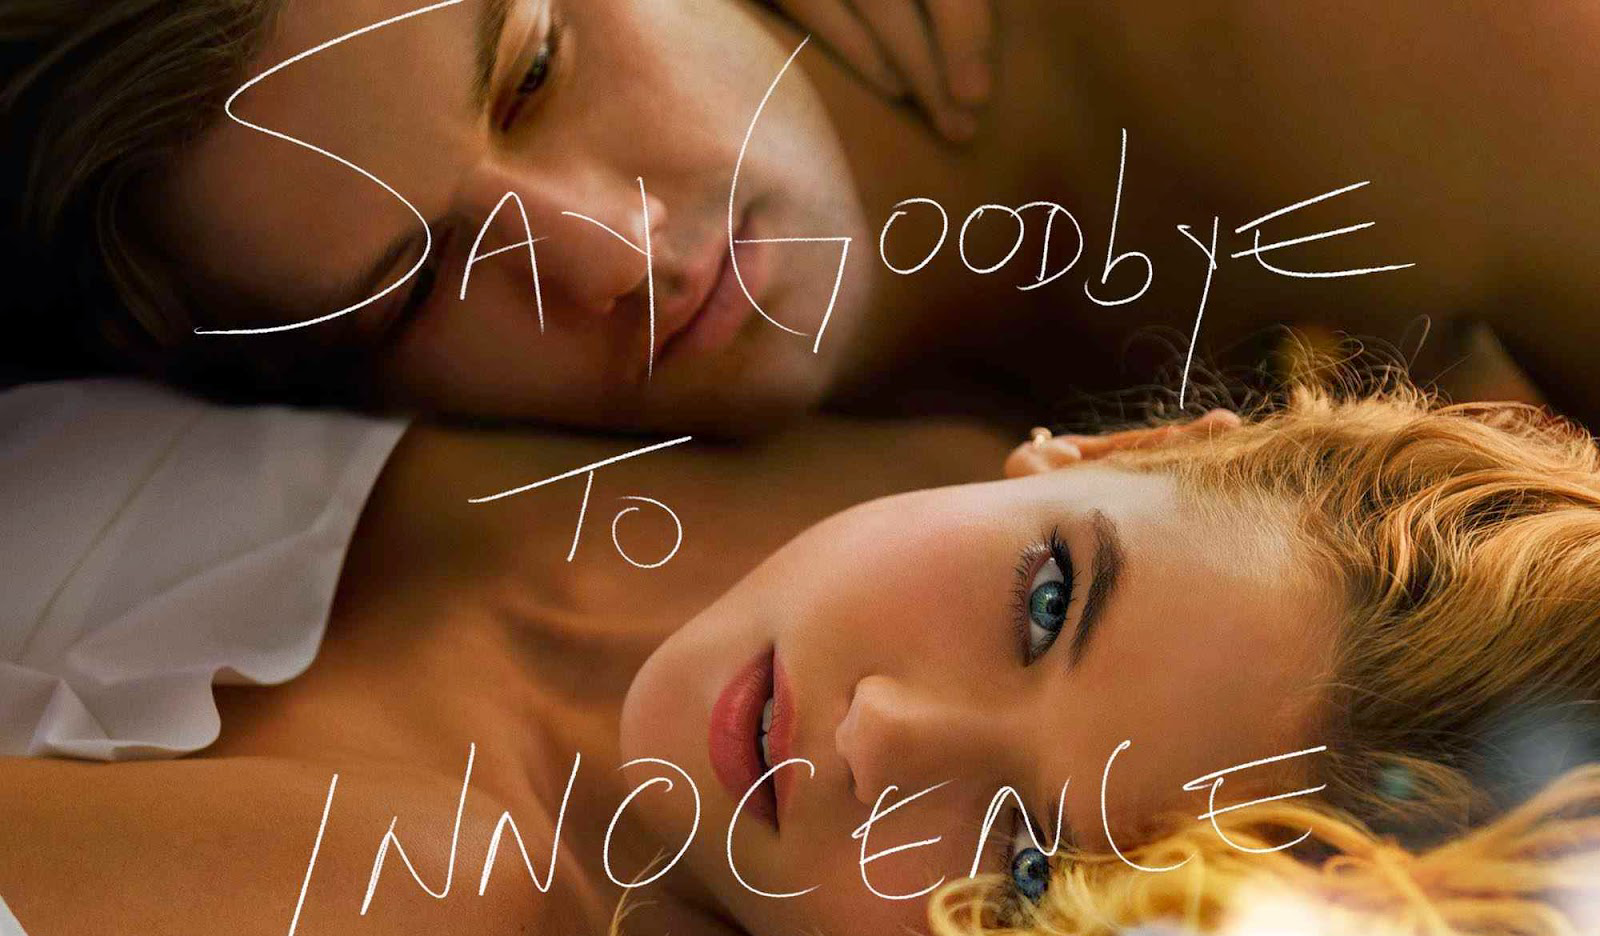 10. "Endless Love" (musical) based on the film and novel - wide 1